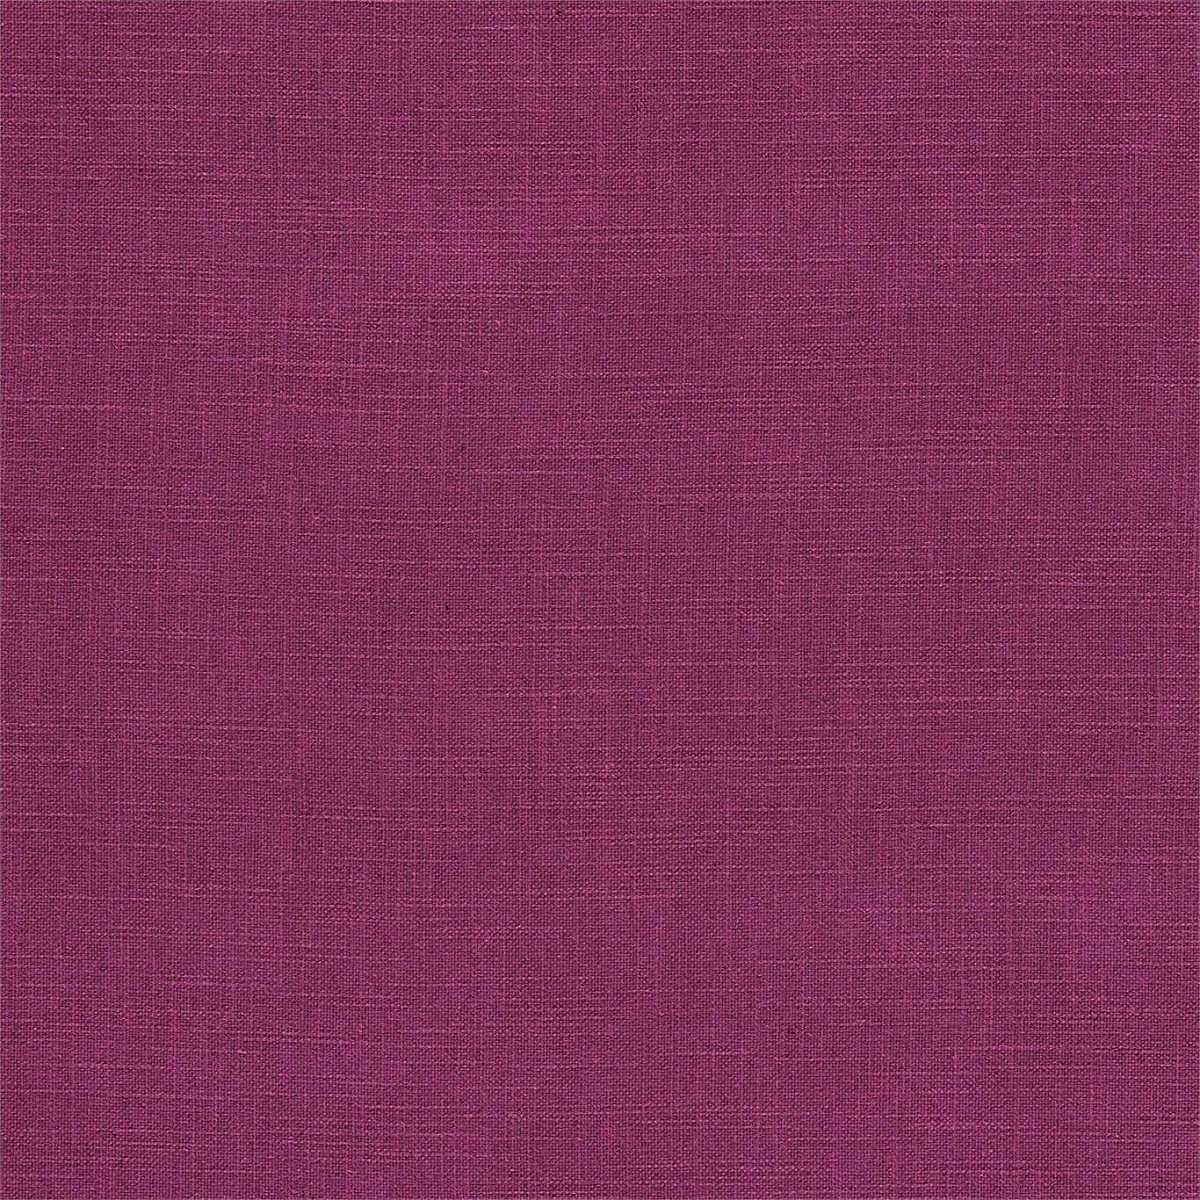 Tuscany Ii Mulberry Fabric by Sanderson